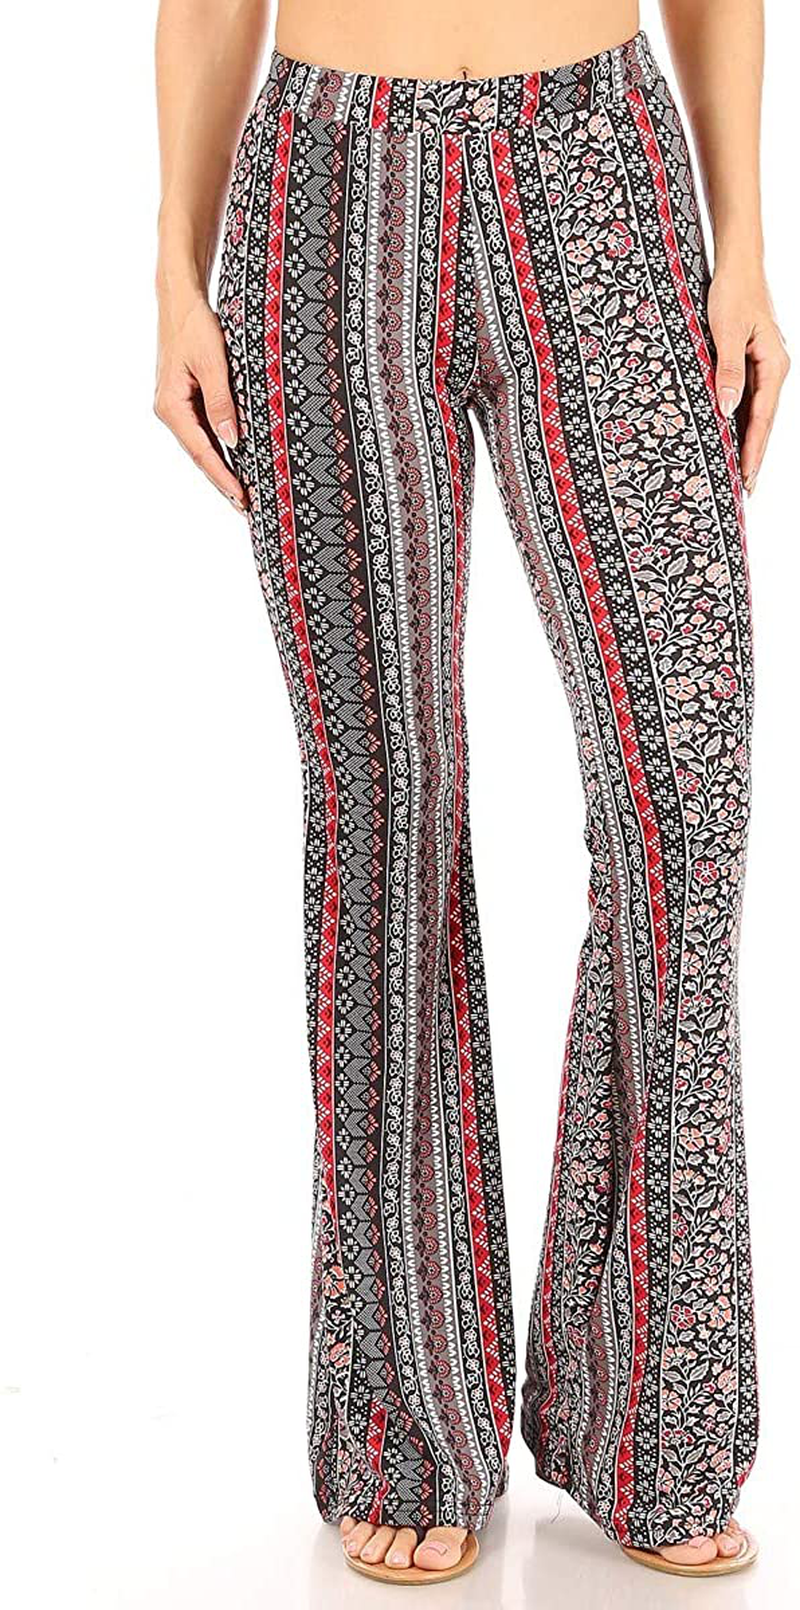 ShoSho Womens Flare Palazzo Pants Casual Boho Bell Bottoms Wide Leg Buttery Soft Bottoms